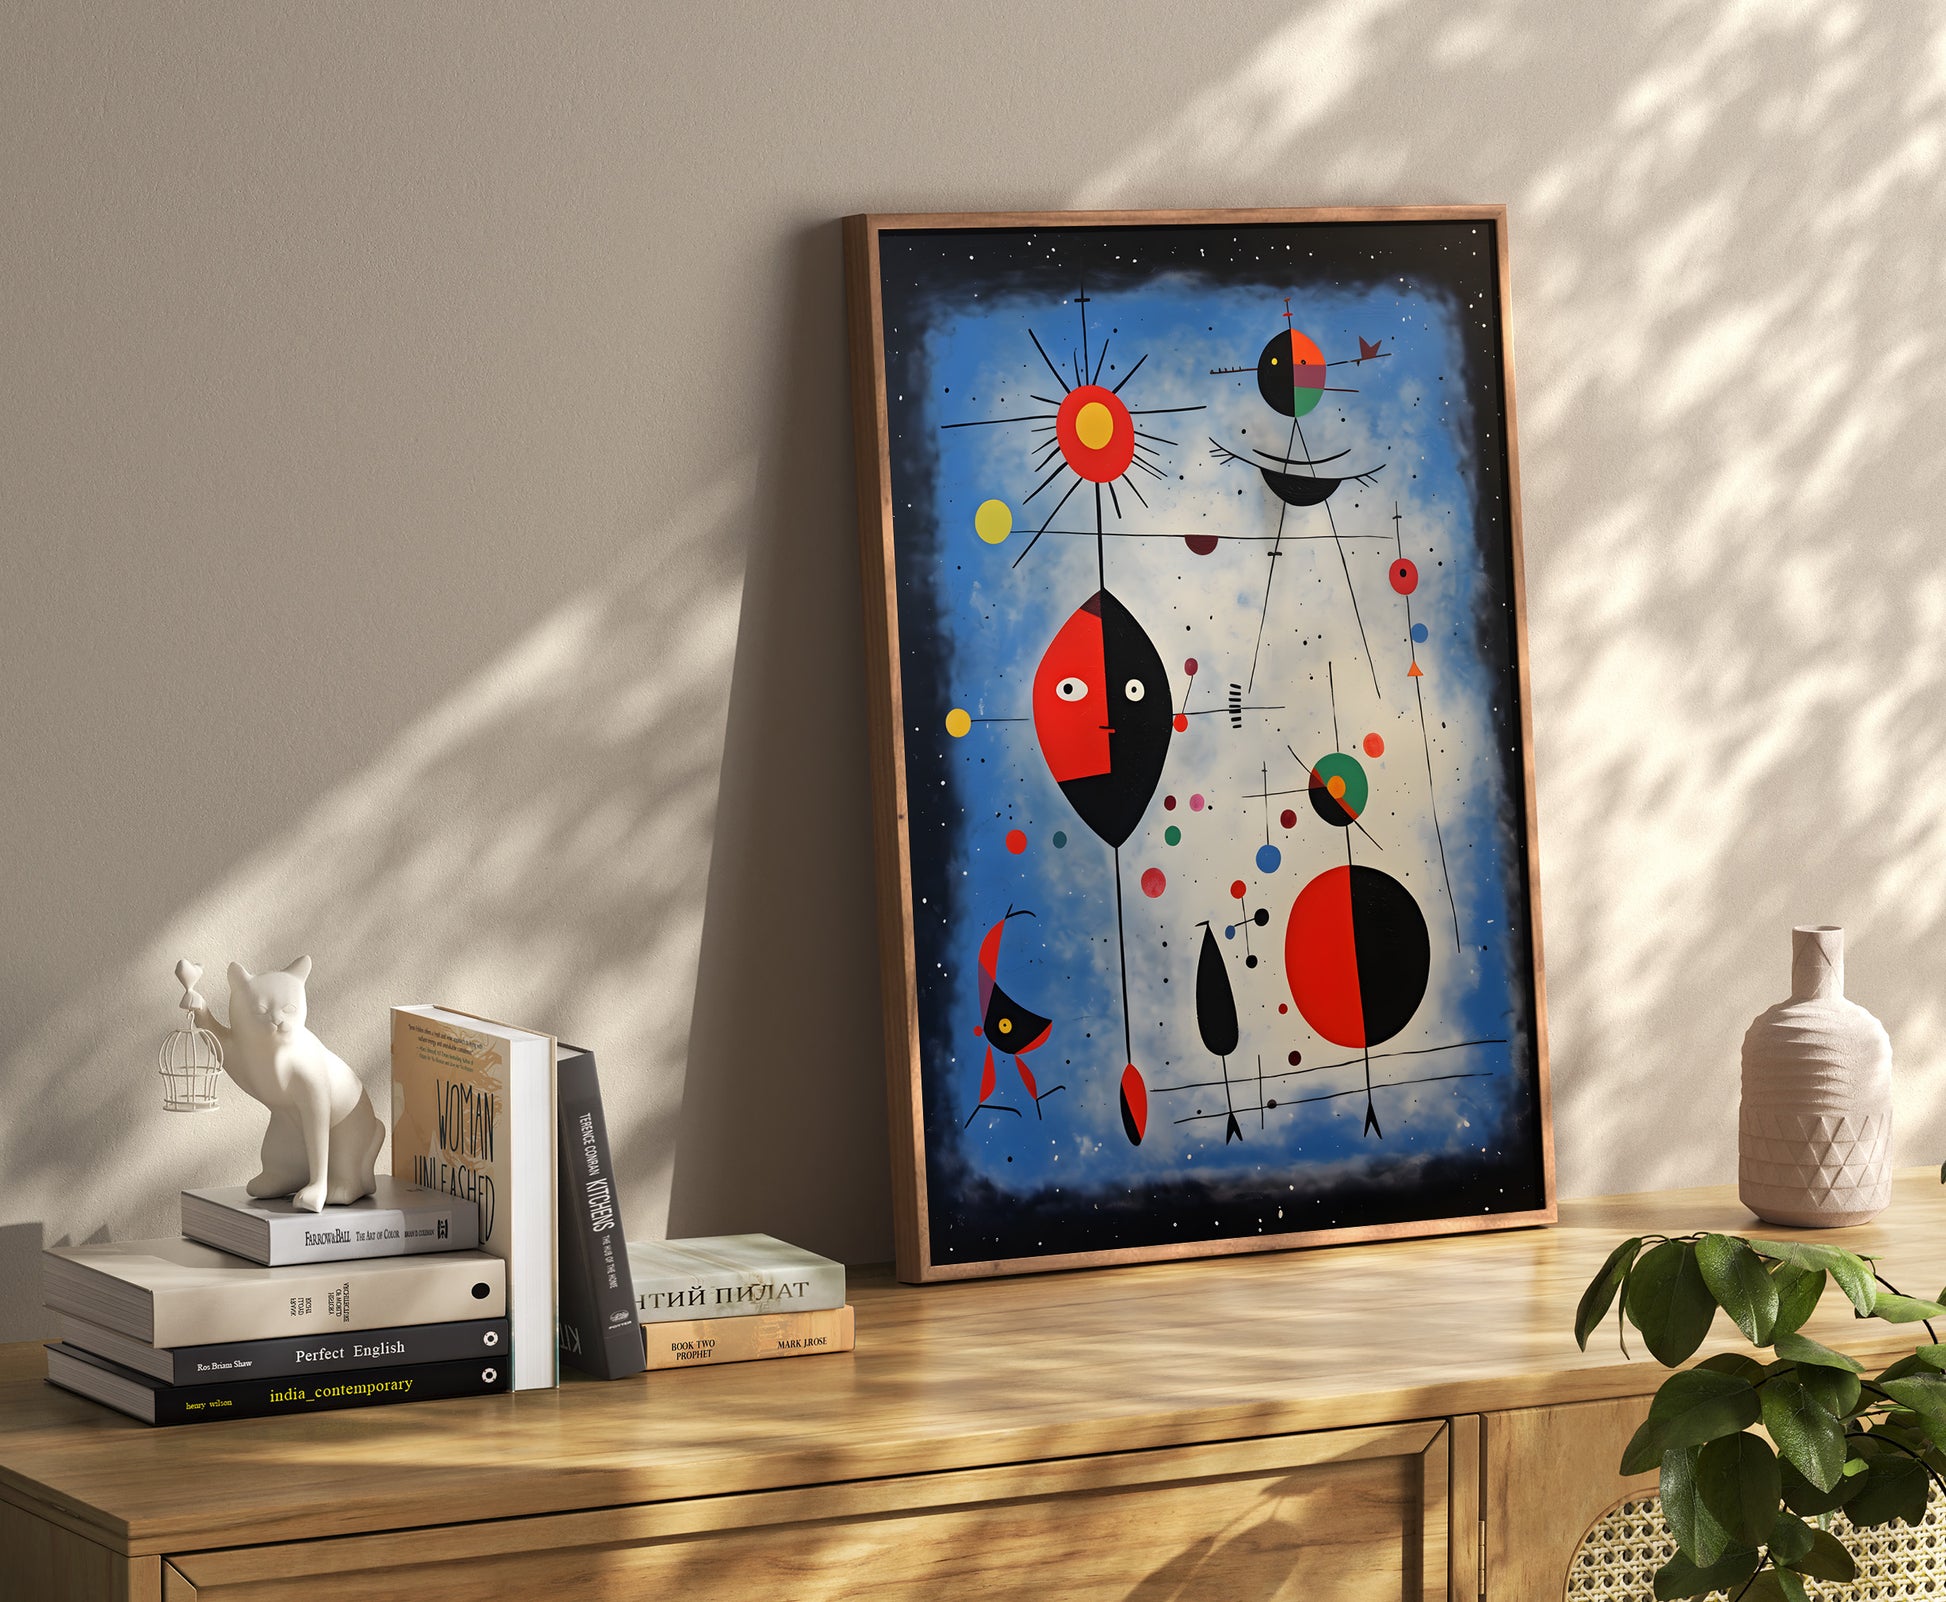 A modern abstract painting displayed in a frame on a wooden sideboard with books and decor.